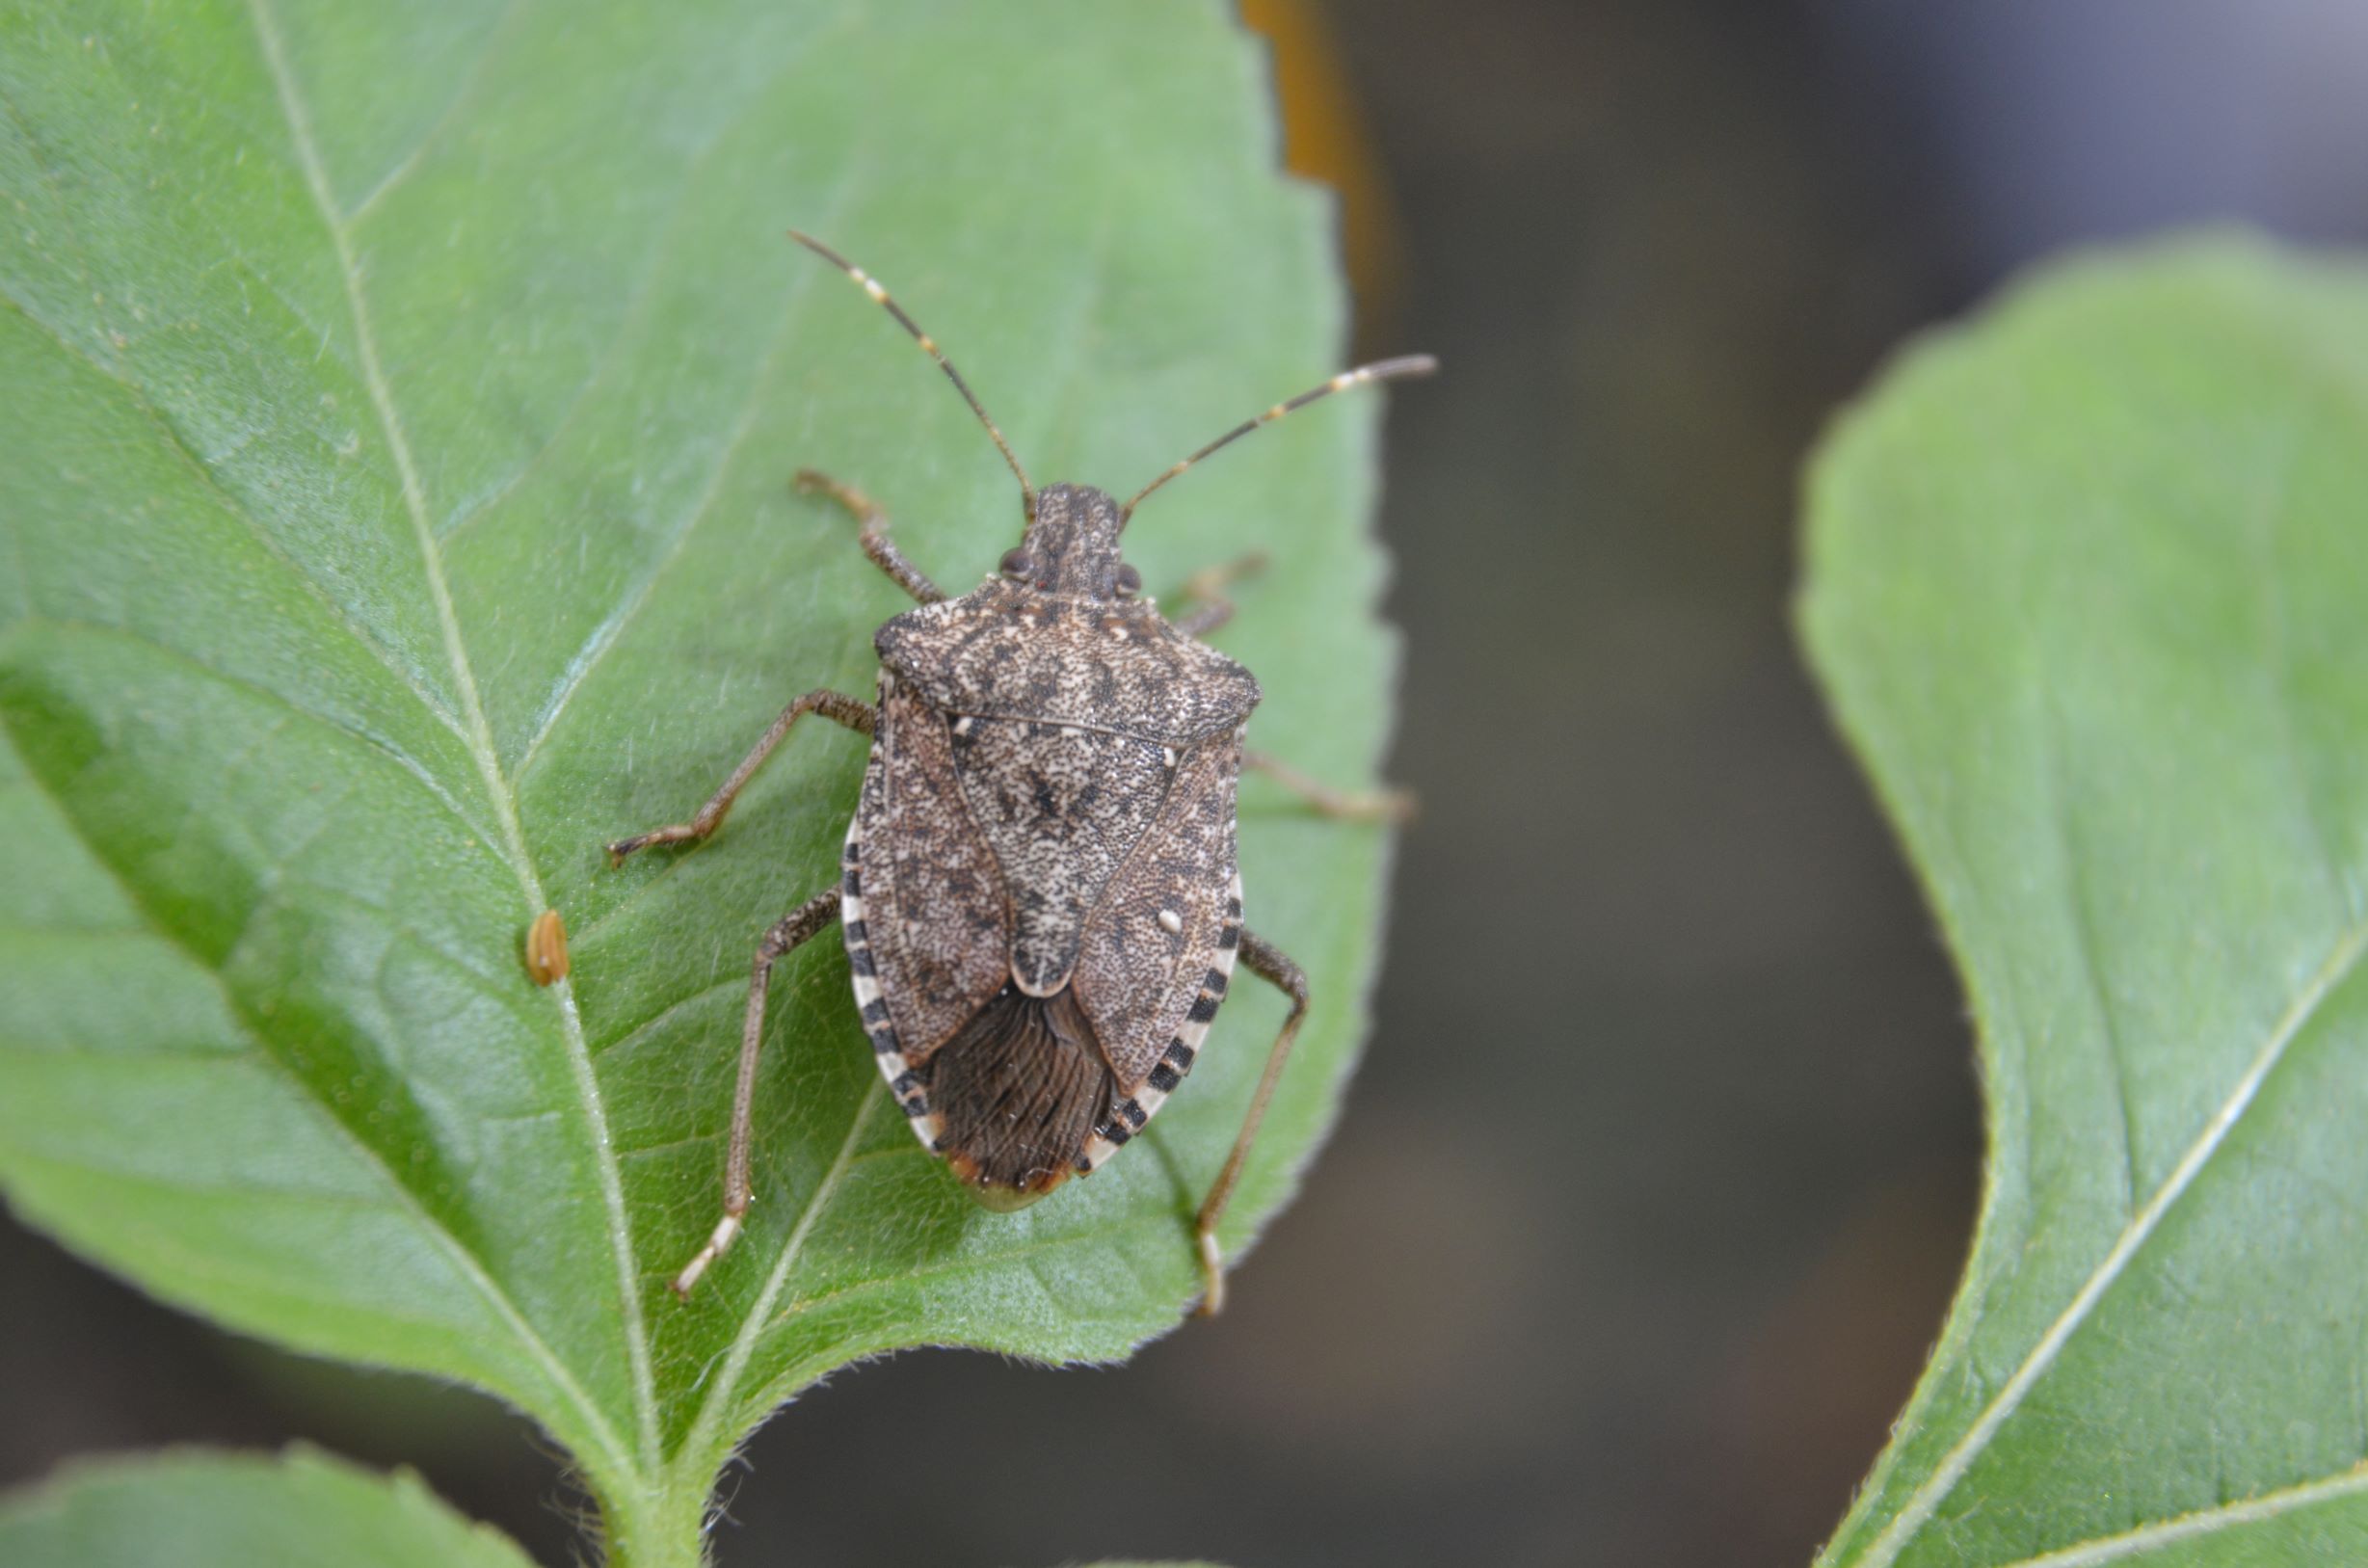 The invasive brown marmorated stink bug rests on a leaf.